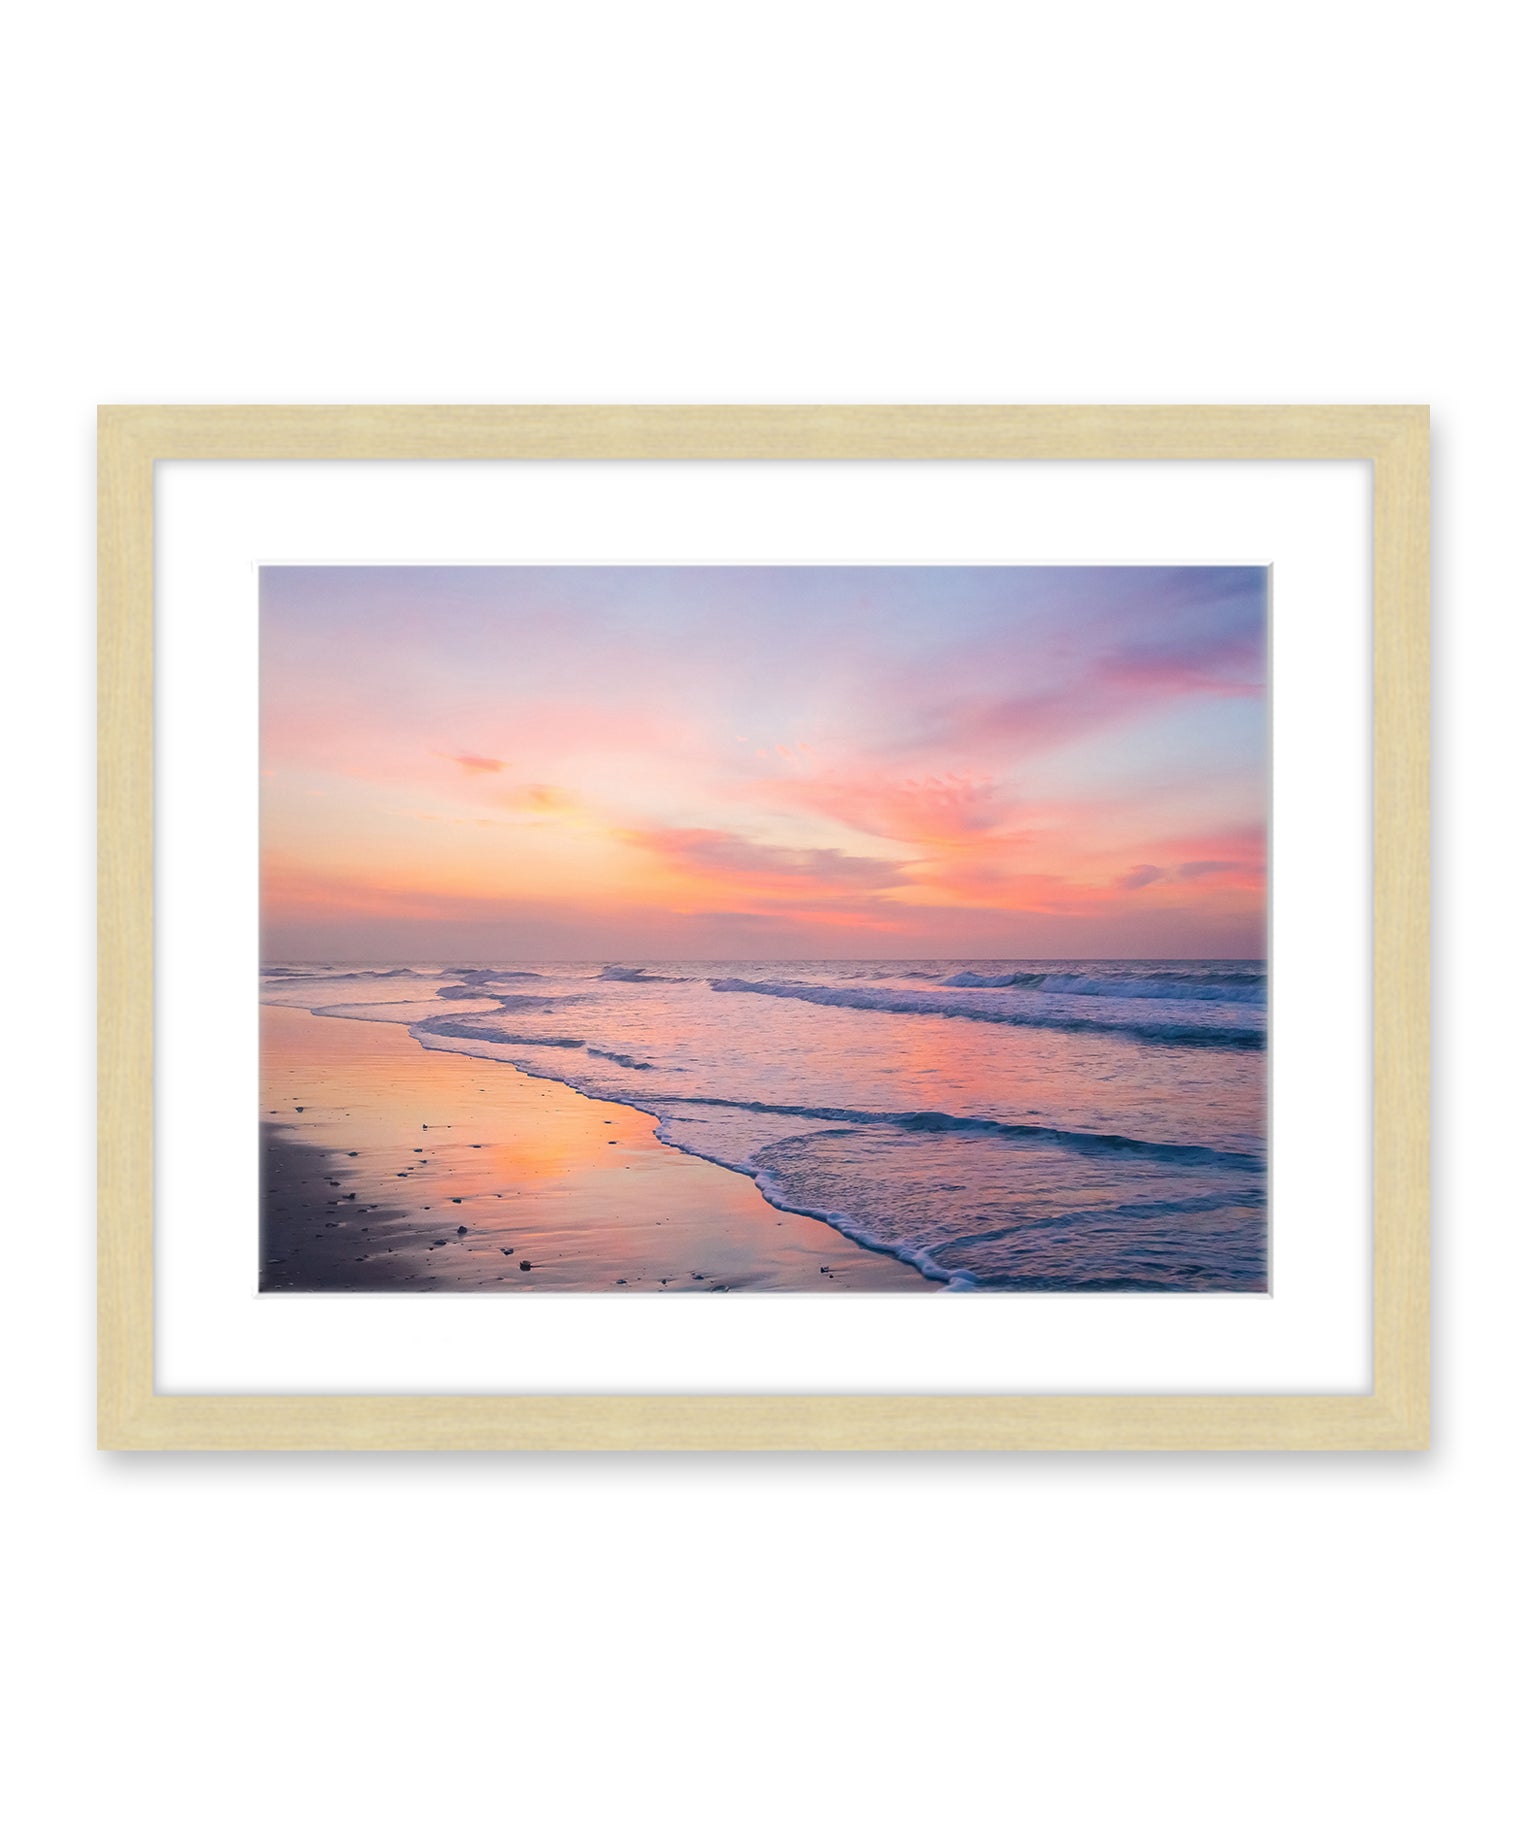 colorful pink and purple sunrise Wrightsville beach photograph, natural wood frame by Wright and Roam